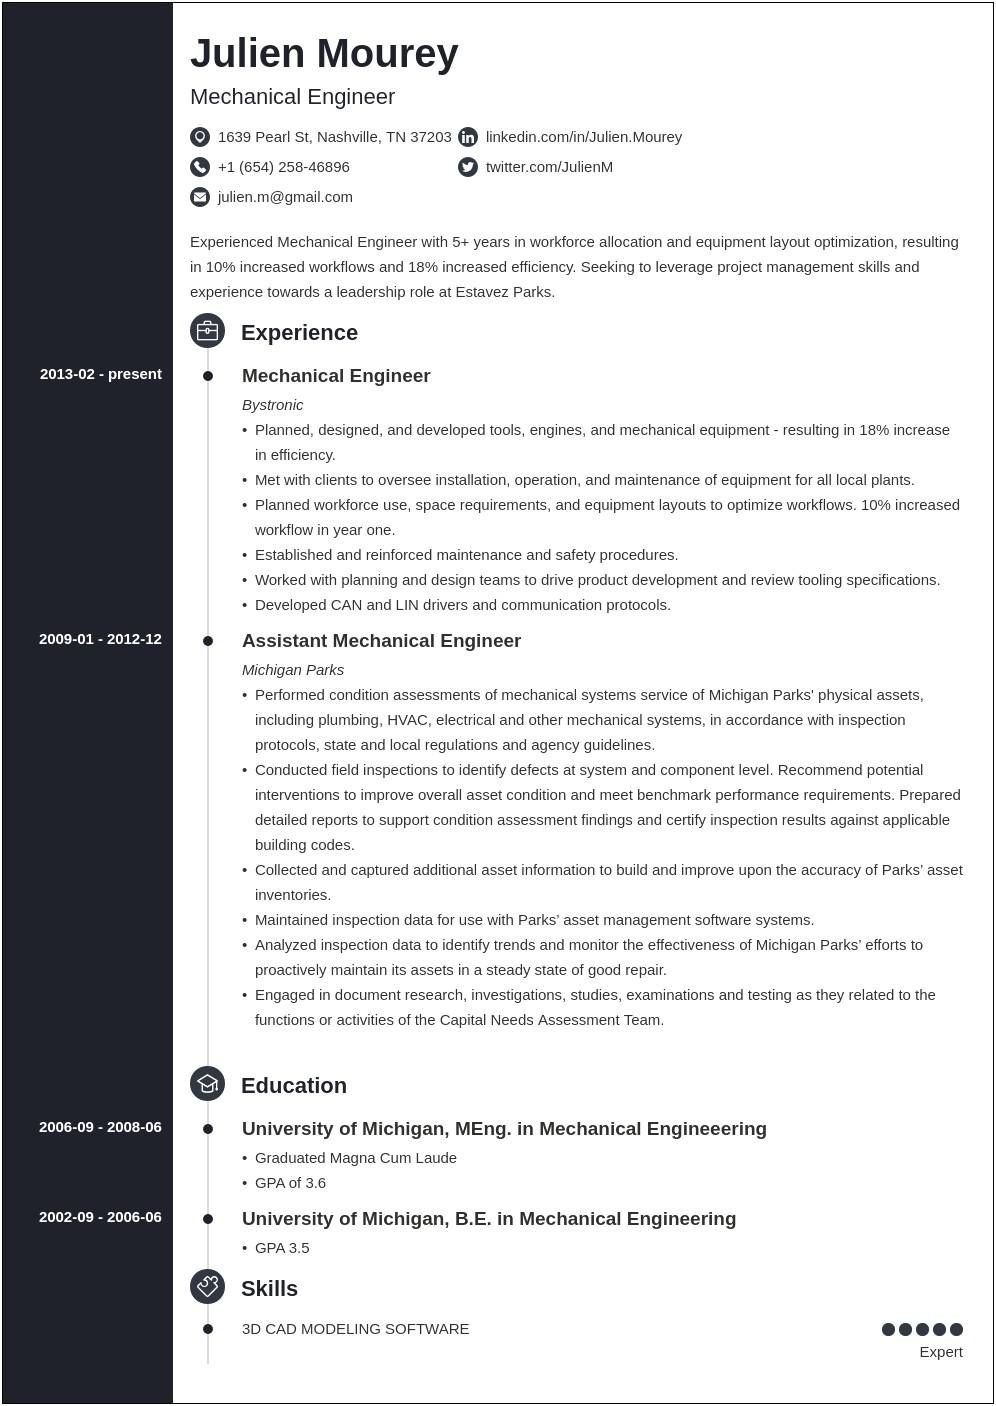 Sample Resume For Experienced Mechanical Engineer Pdf India